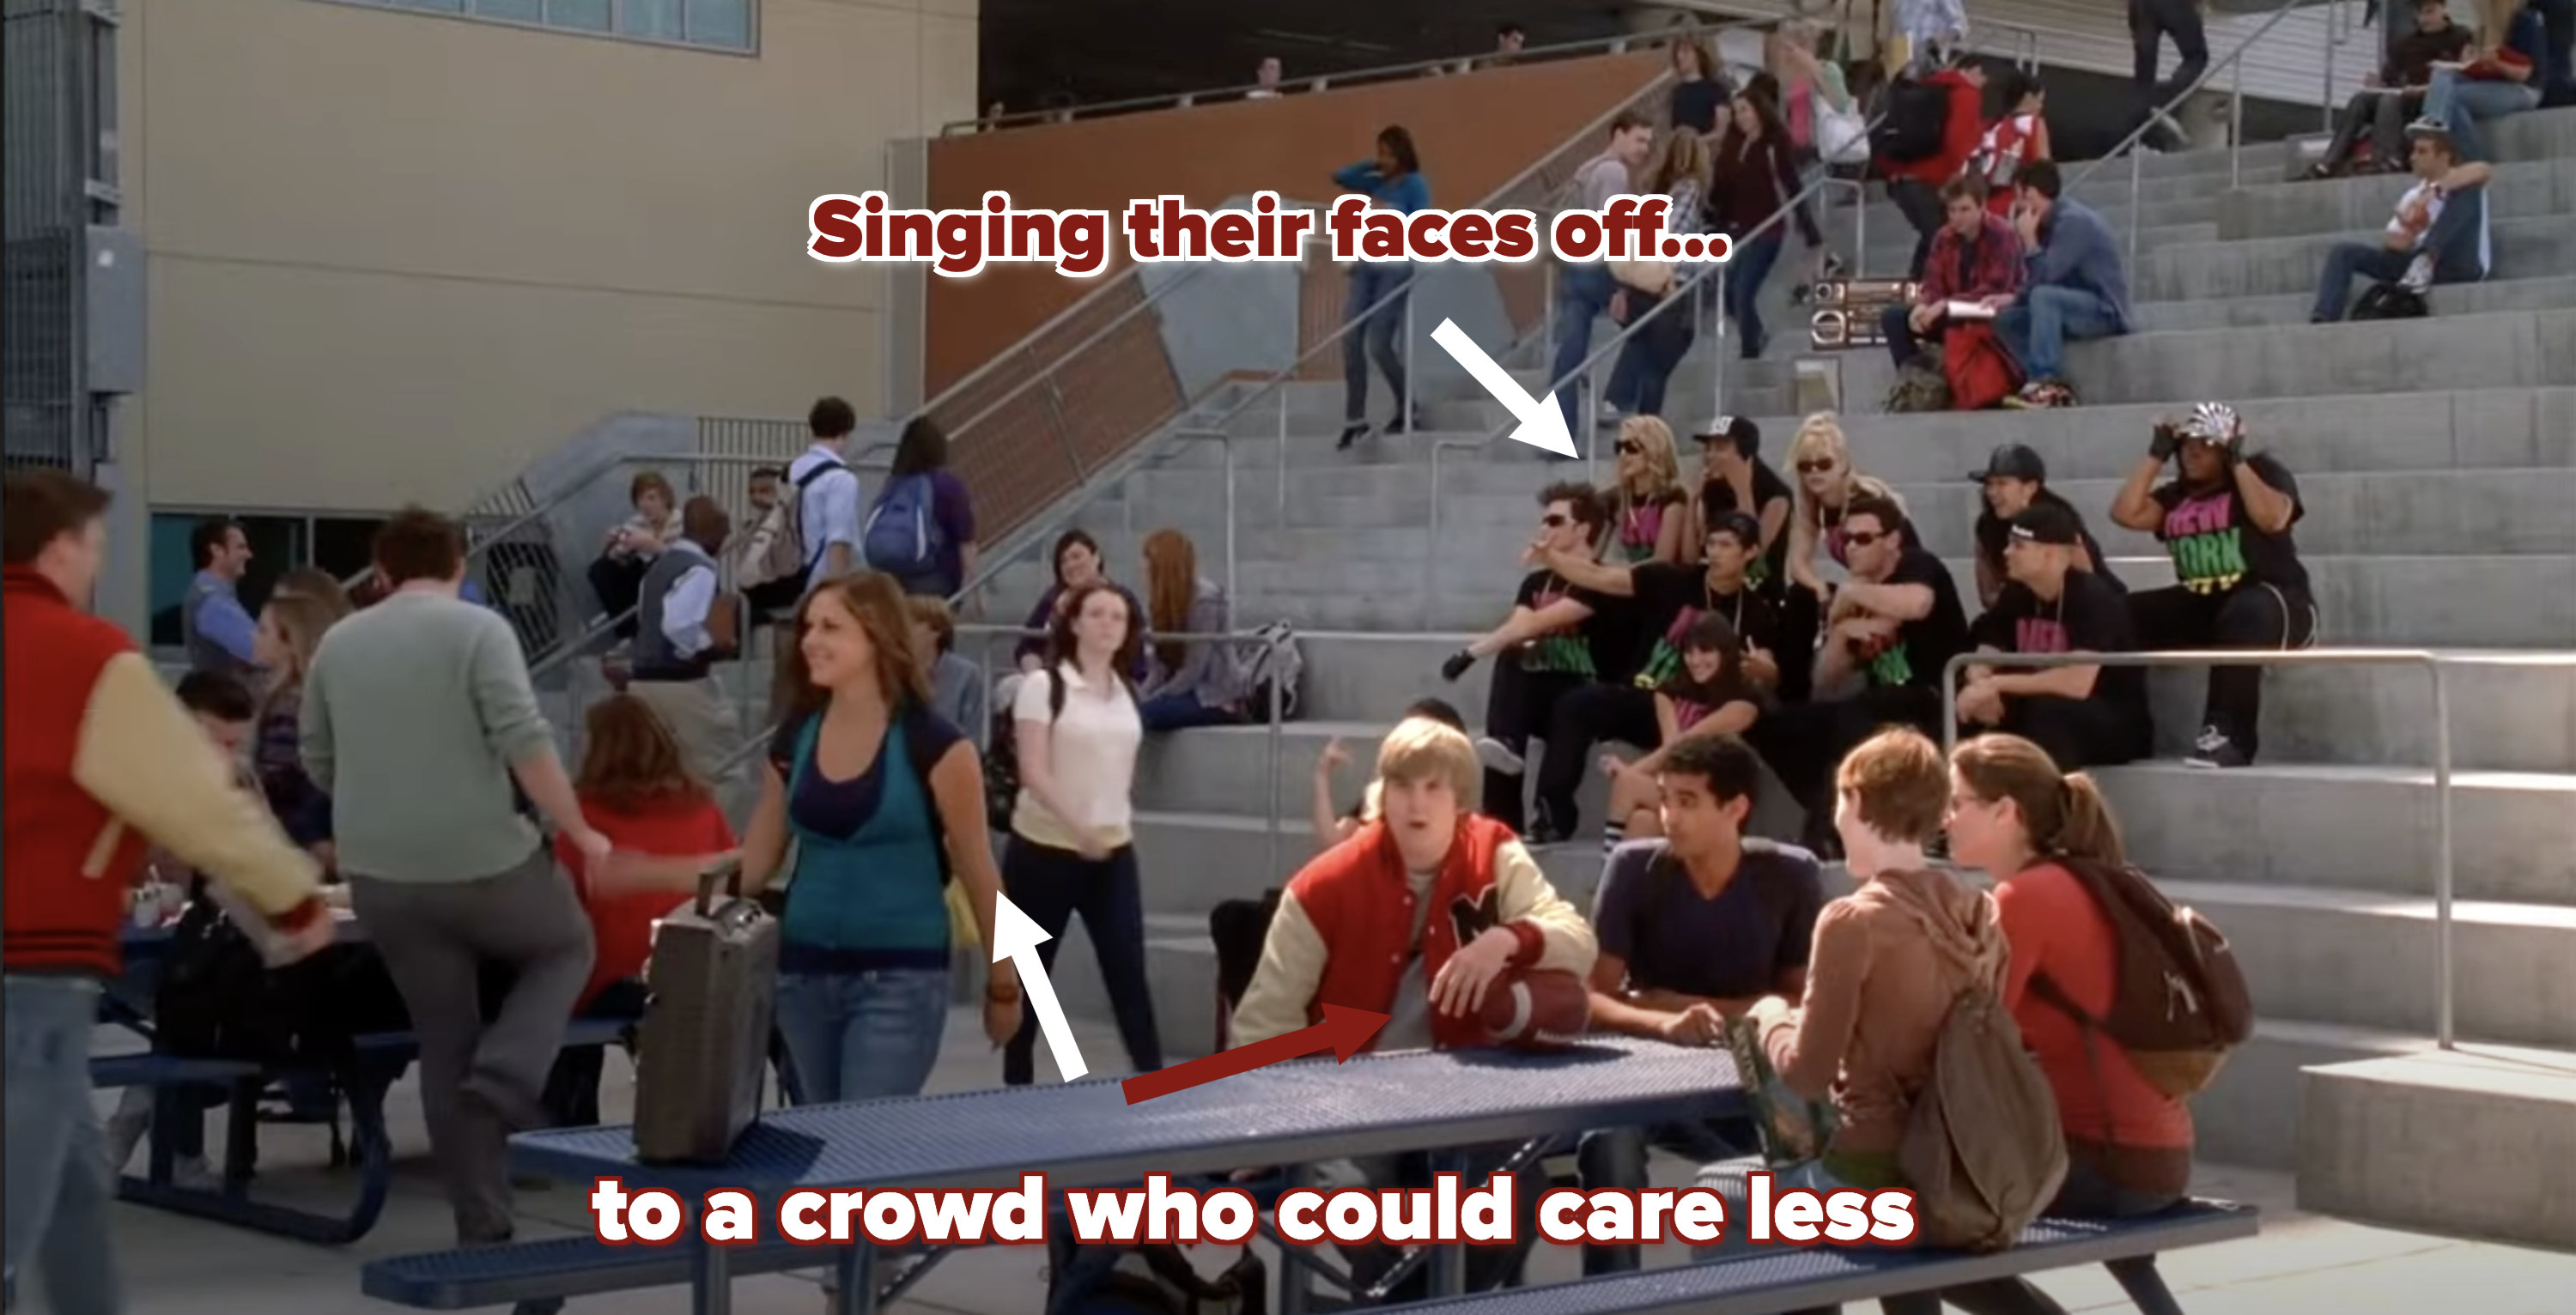 &quot;Glee&quot; cast performing at the outdoor lunch area at school